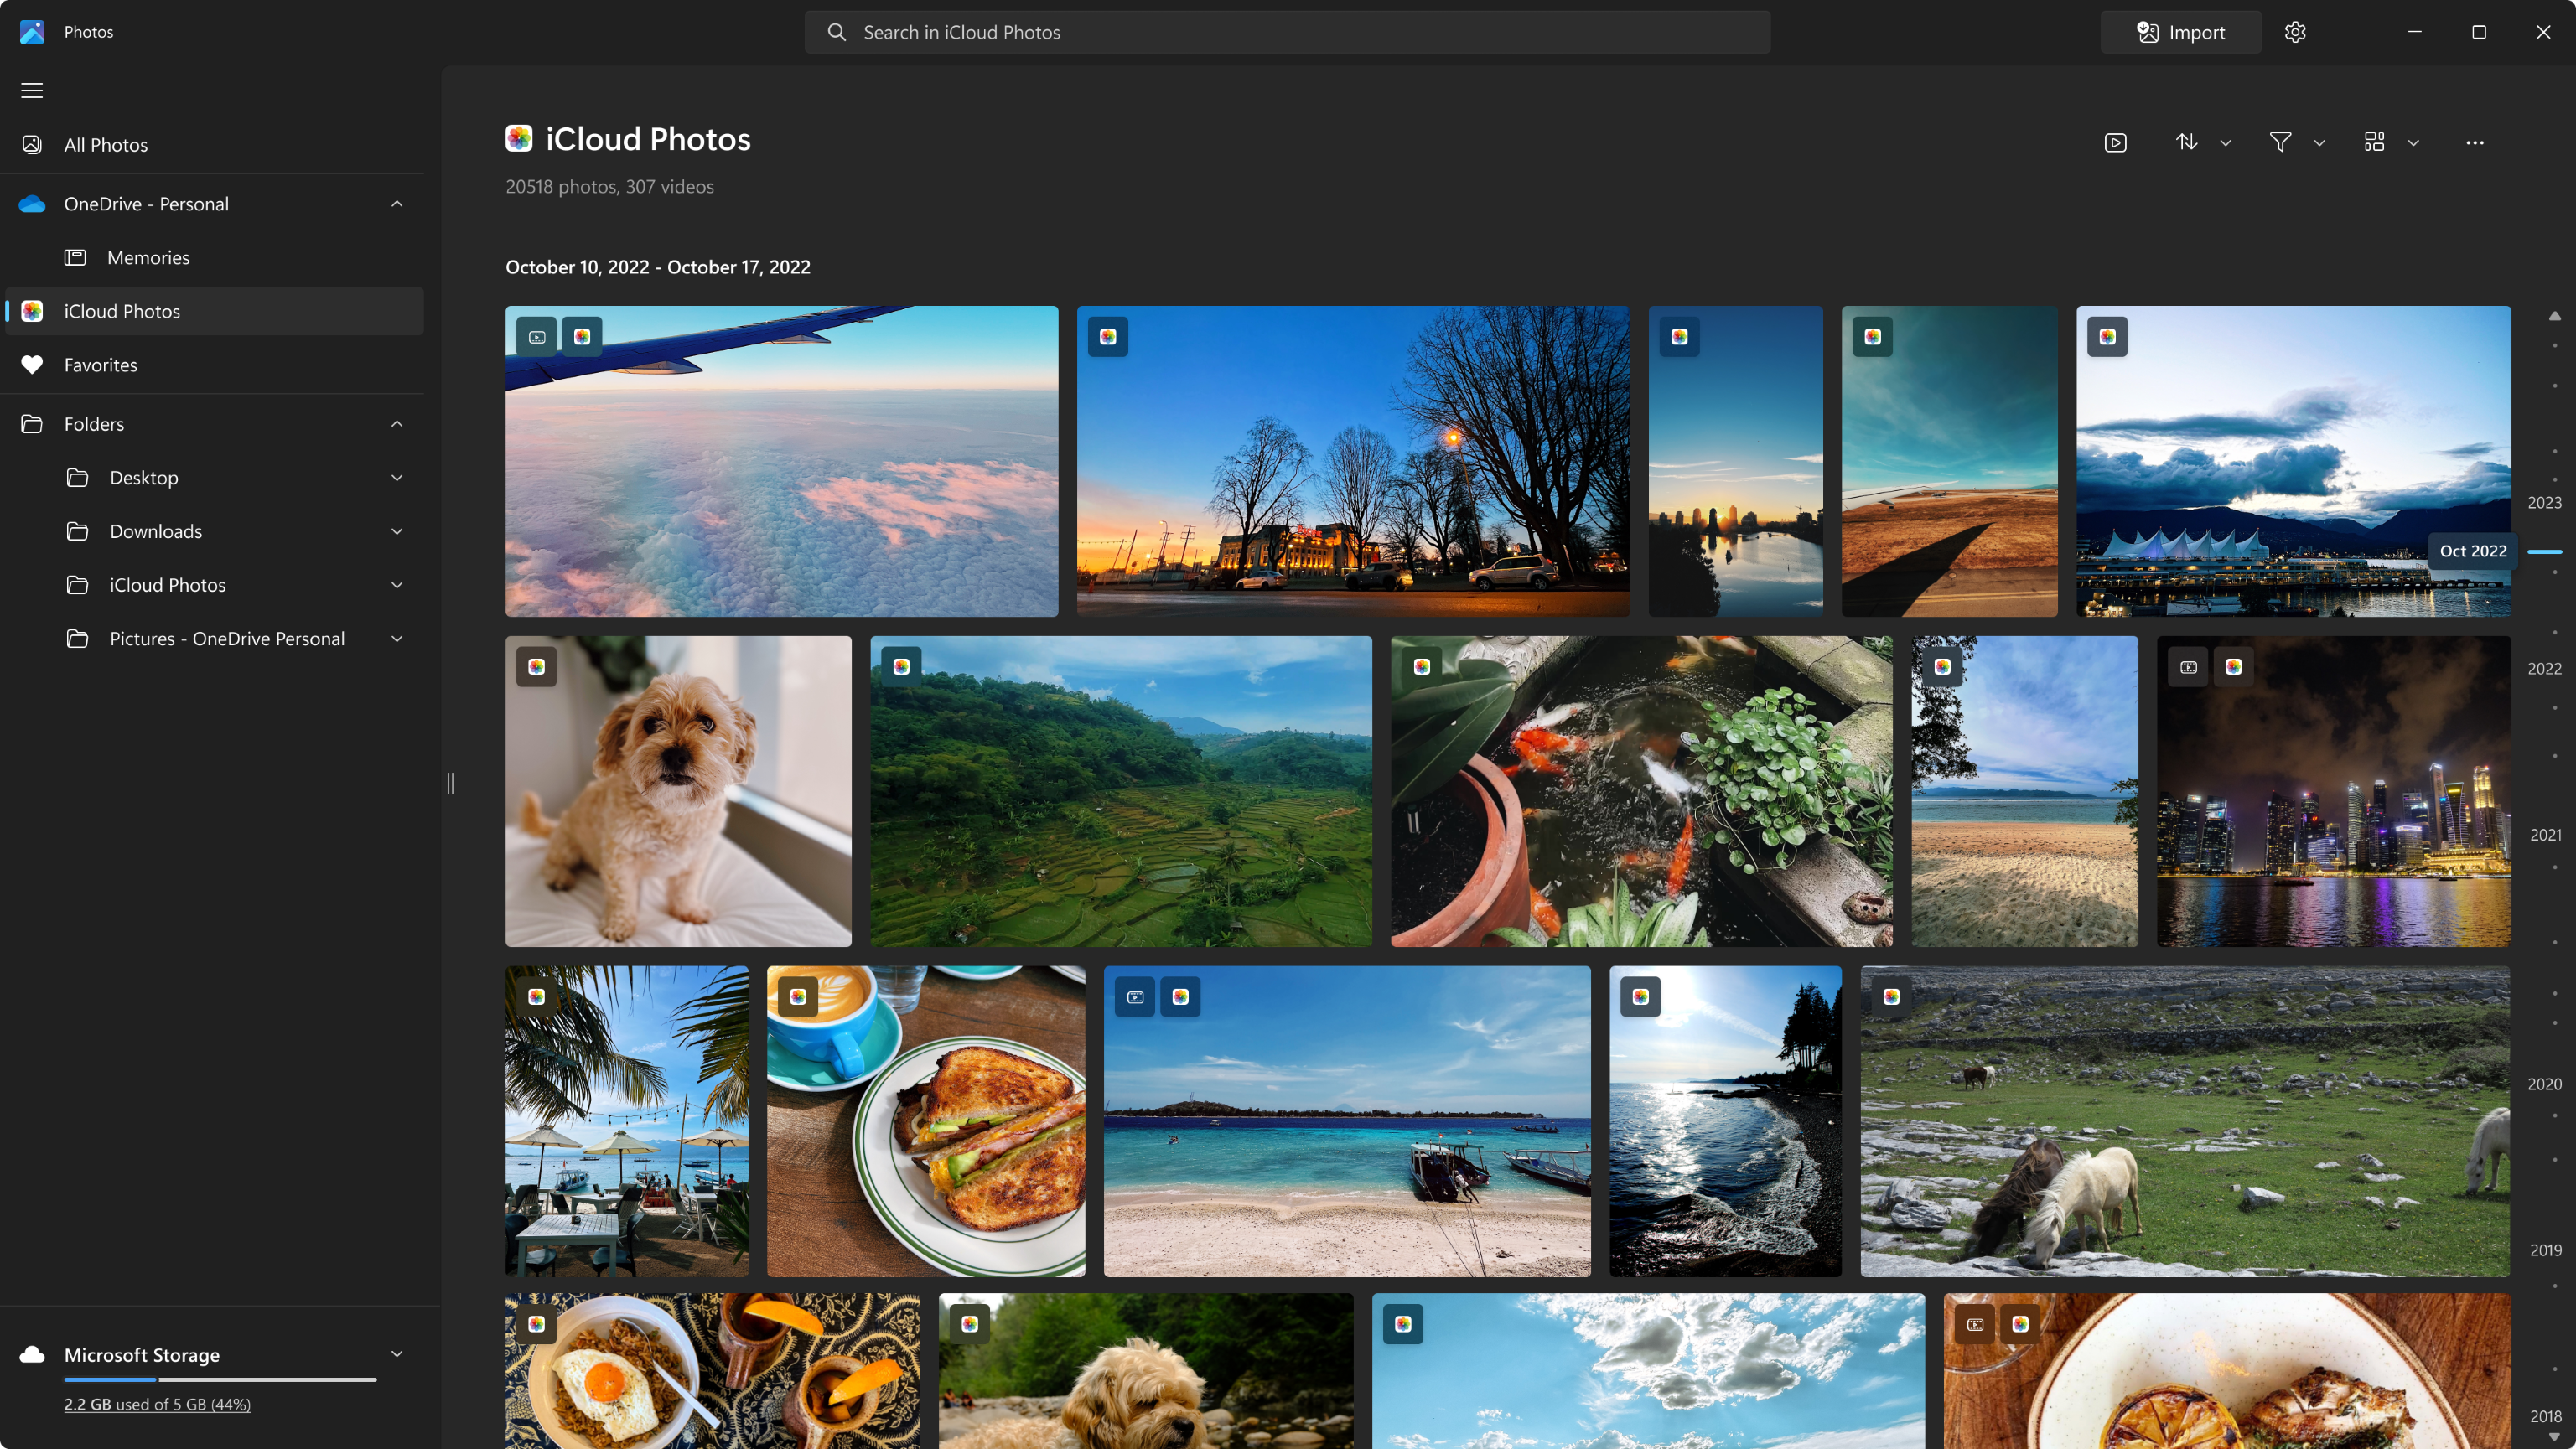 View your iCloud Photos in Microsoft Photos.